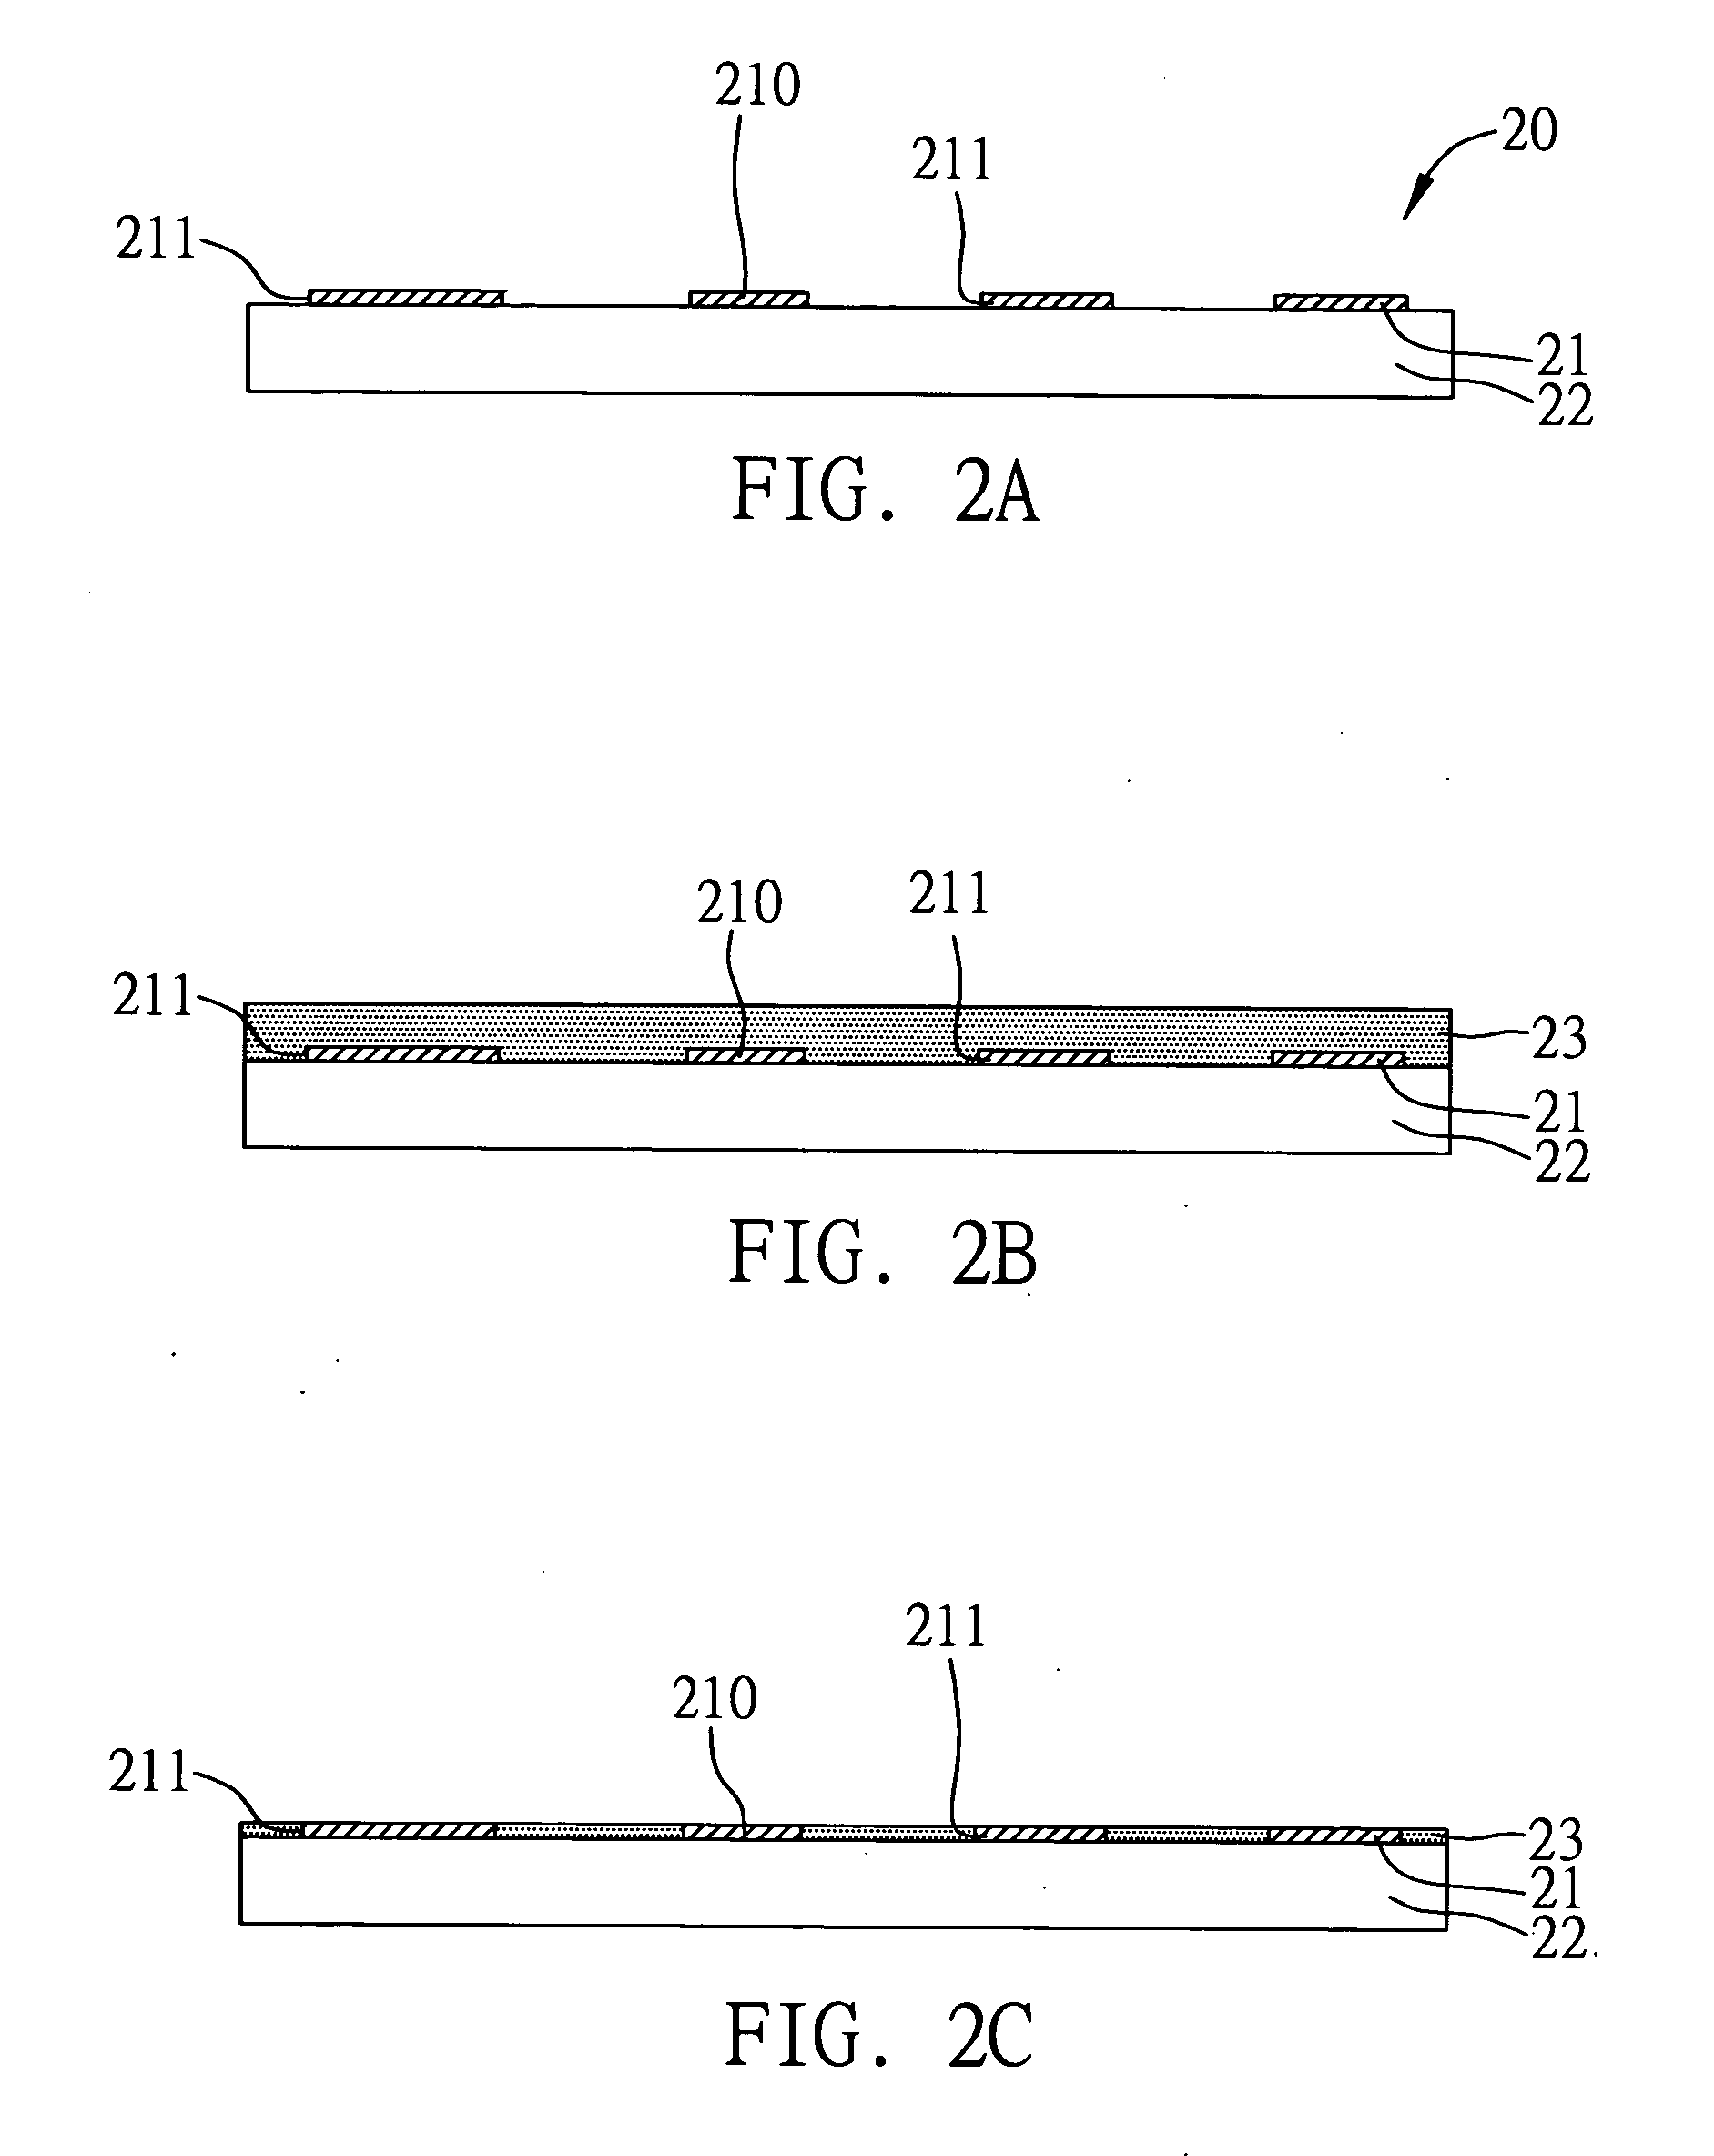 Embedded capacitor structure in circuit board and method for fabricating the same